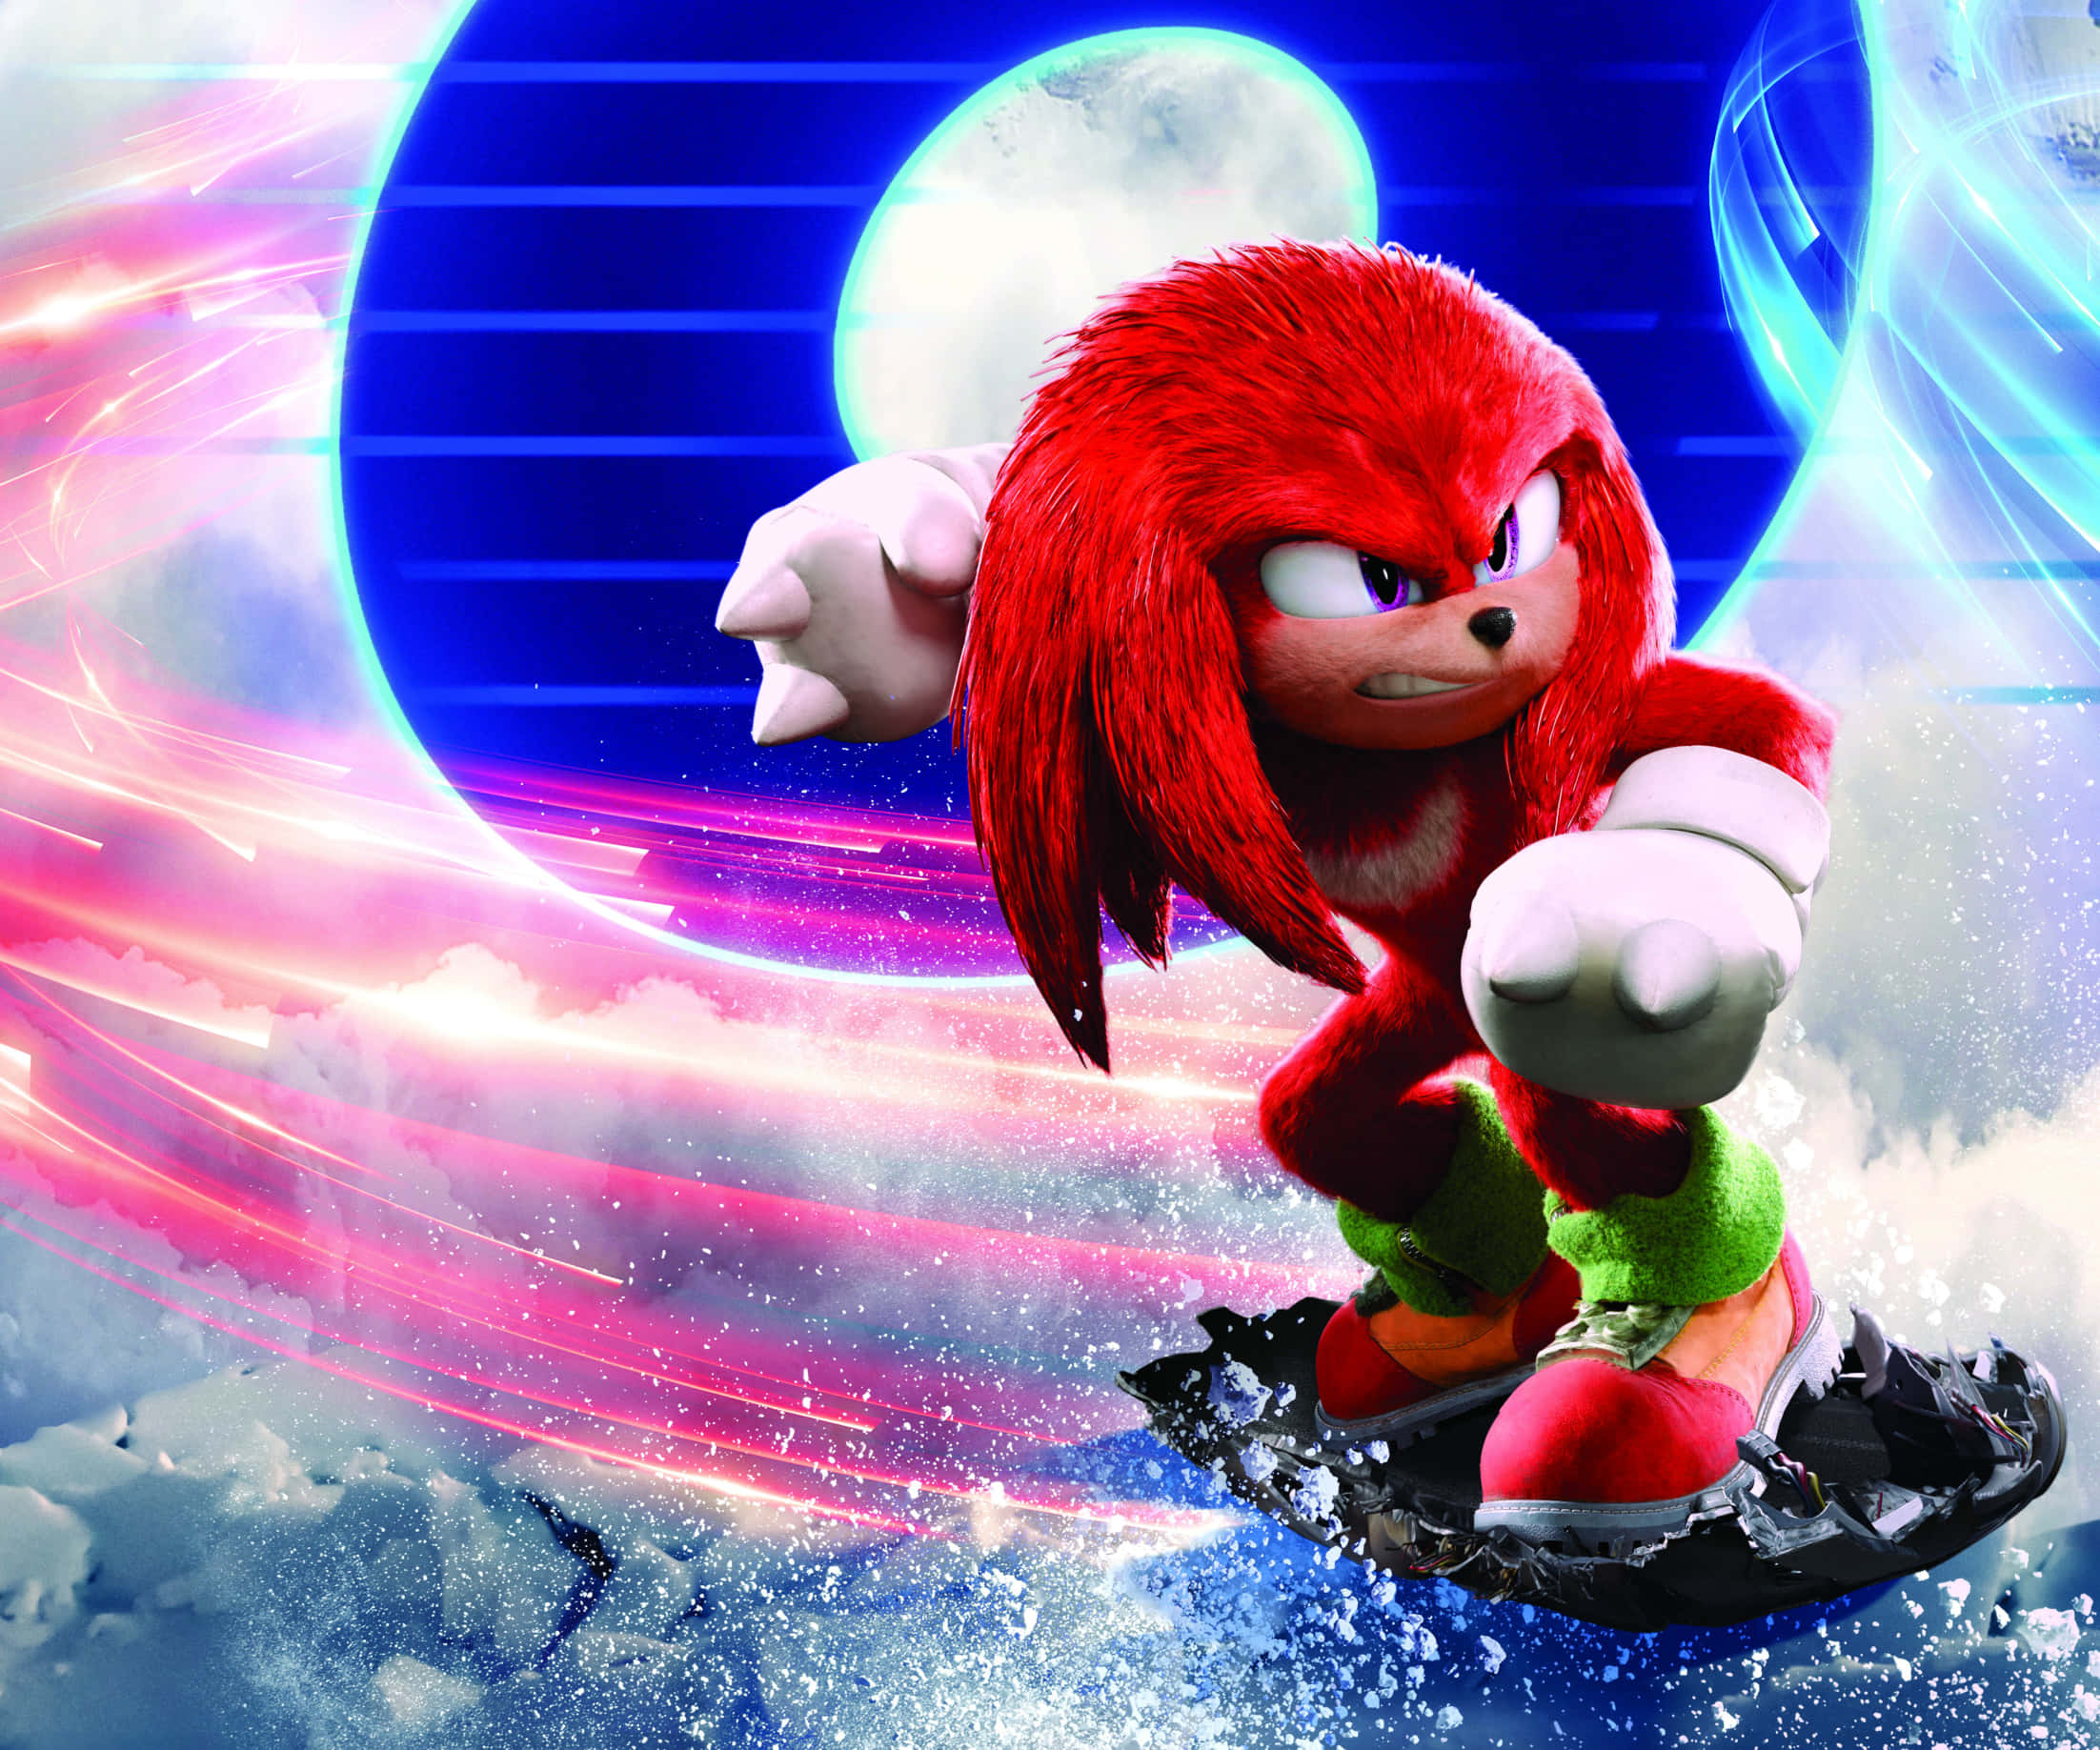 Unshakeable Strength of Knuckles Wallpaper